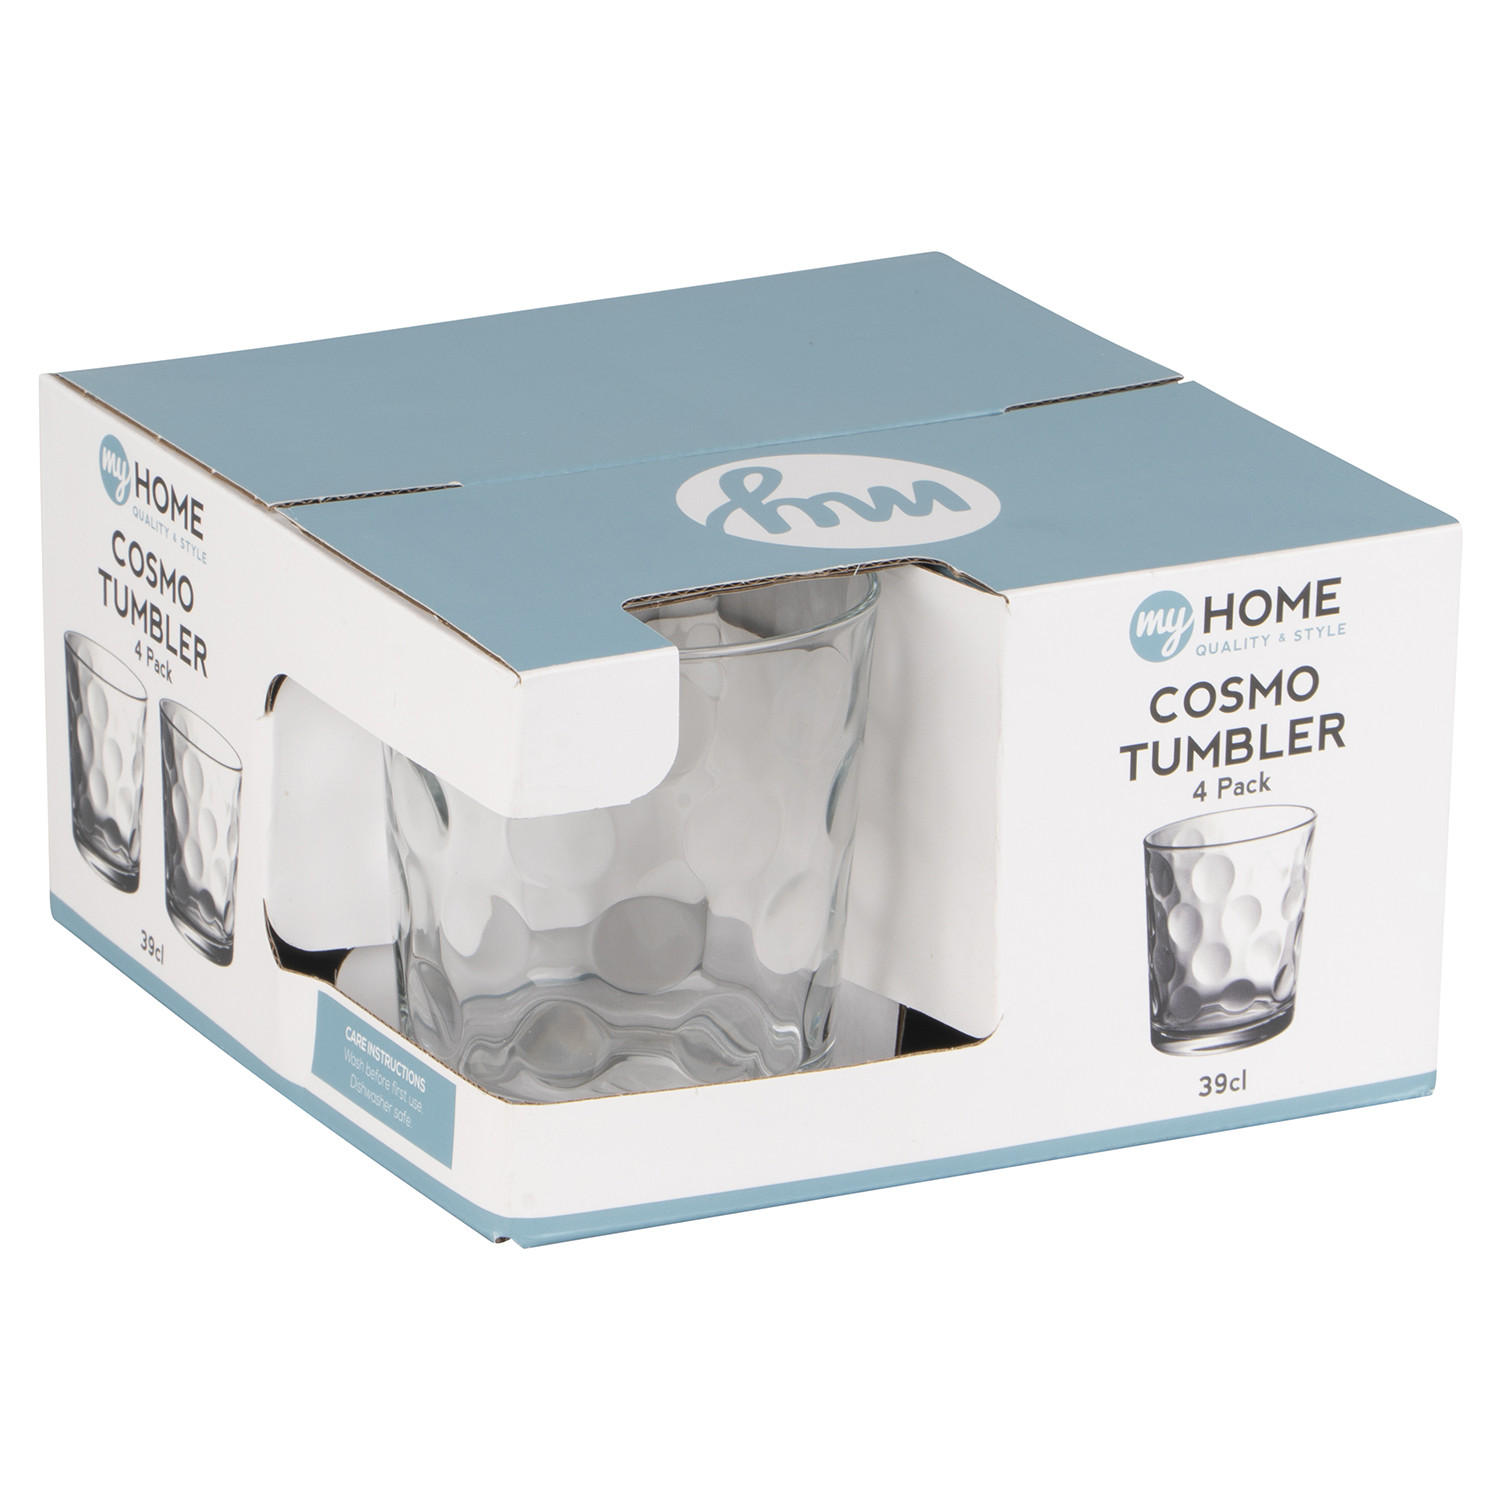 My Home Cosmo Glass Tumbler 4 Pack Image 1